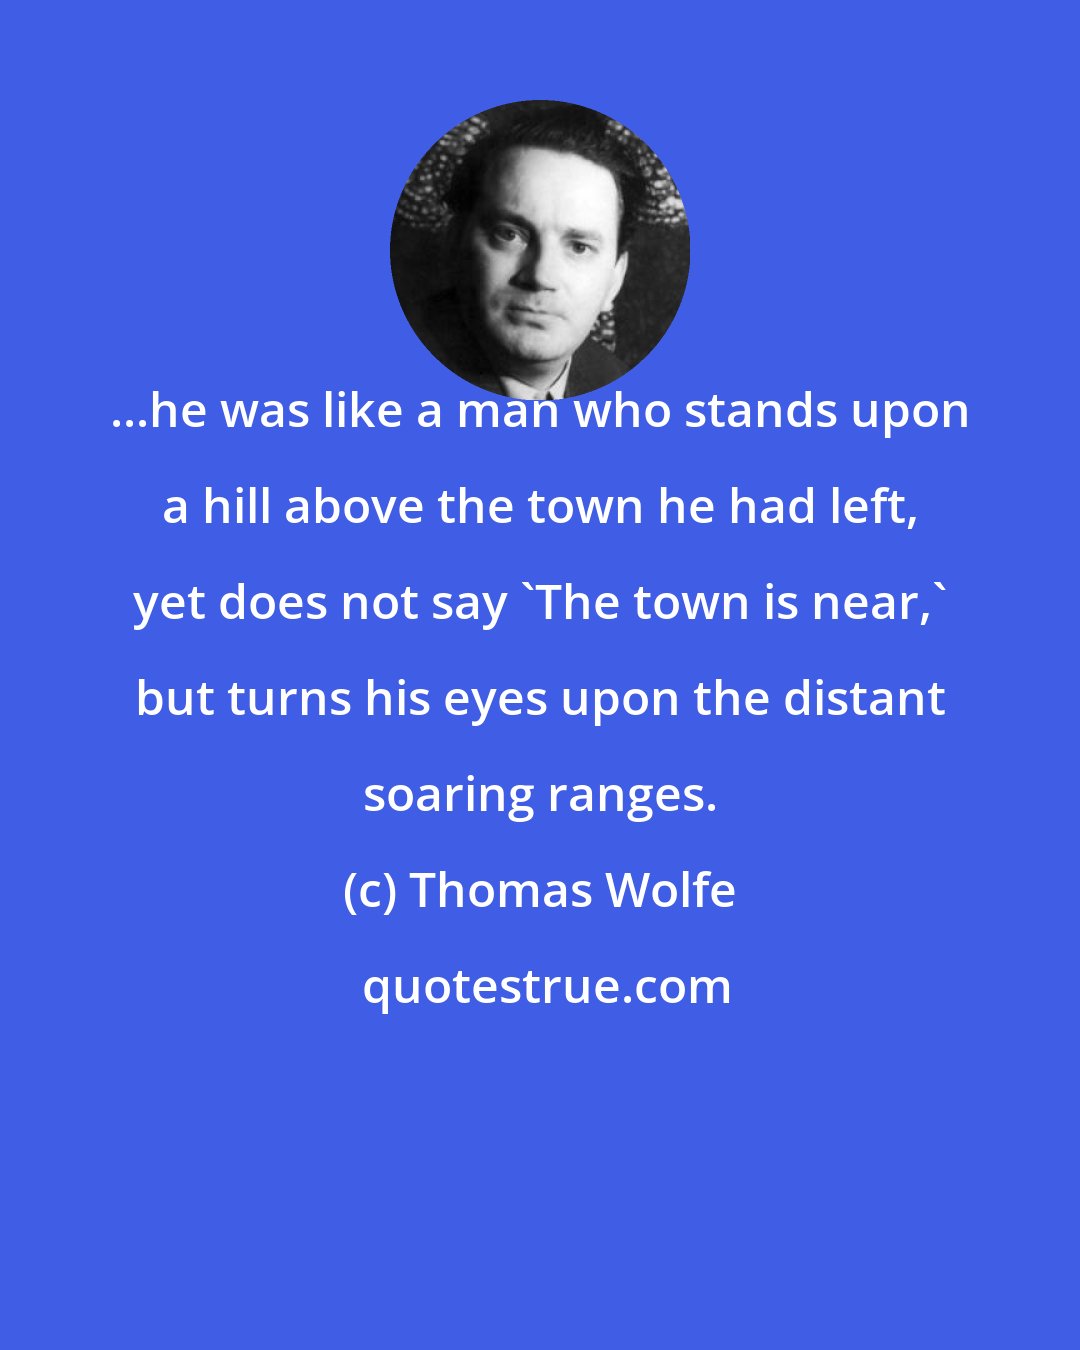 Thomas Wolfe: ...he was like a man who stands upon a hill above the town he had left, yet does not say 'The town is near,' but turns his eyes upon the distant soaring ranges.